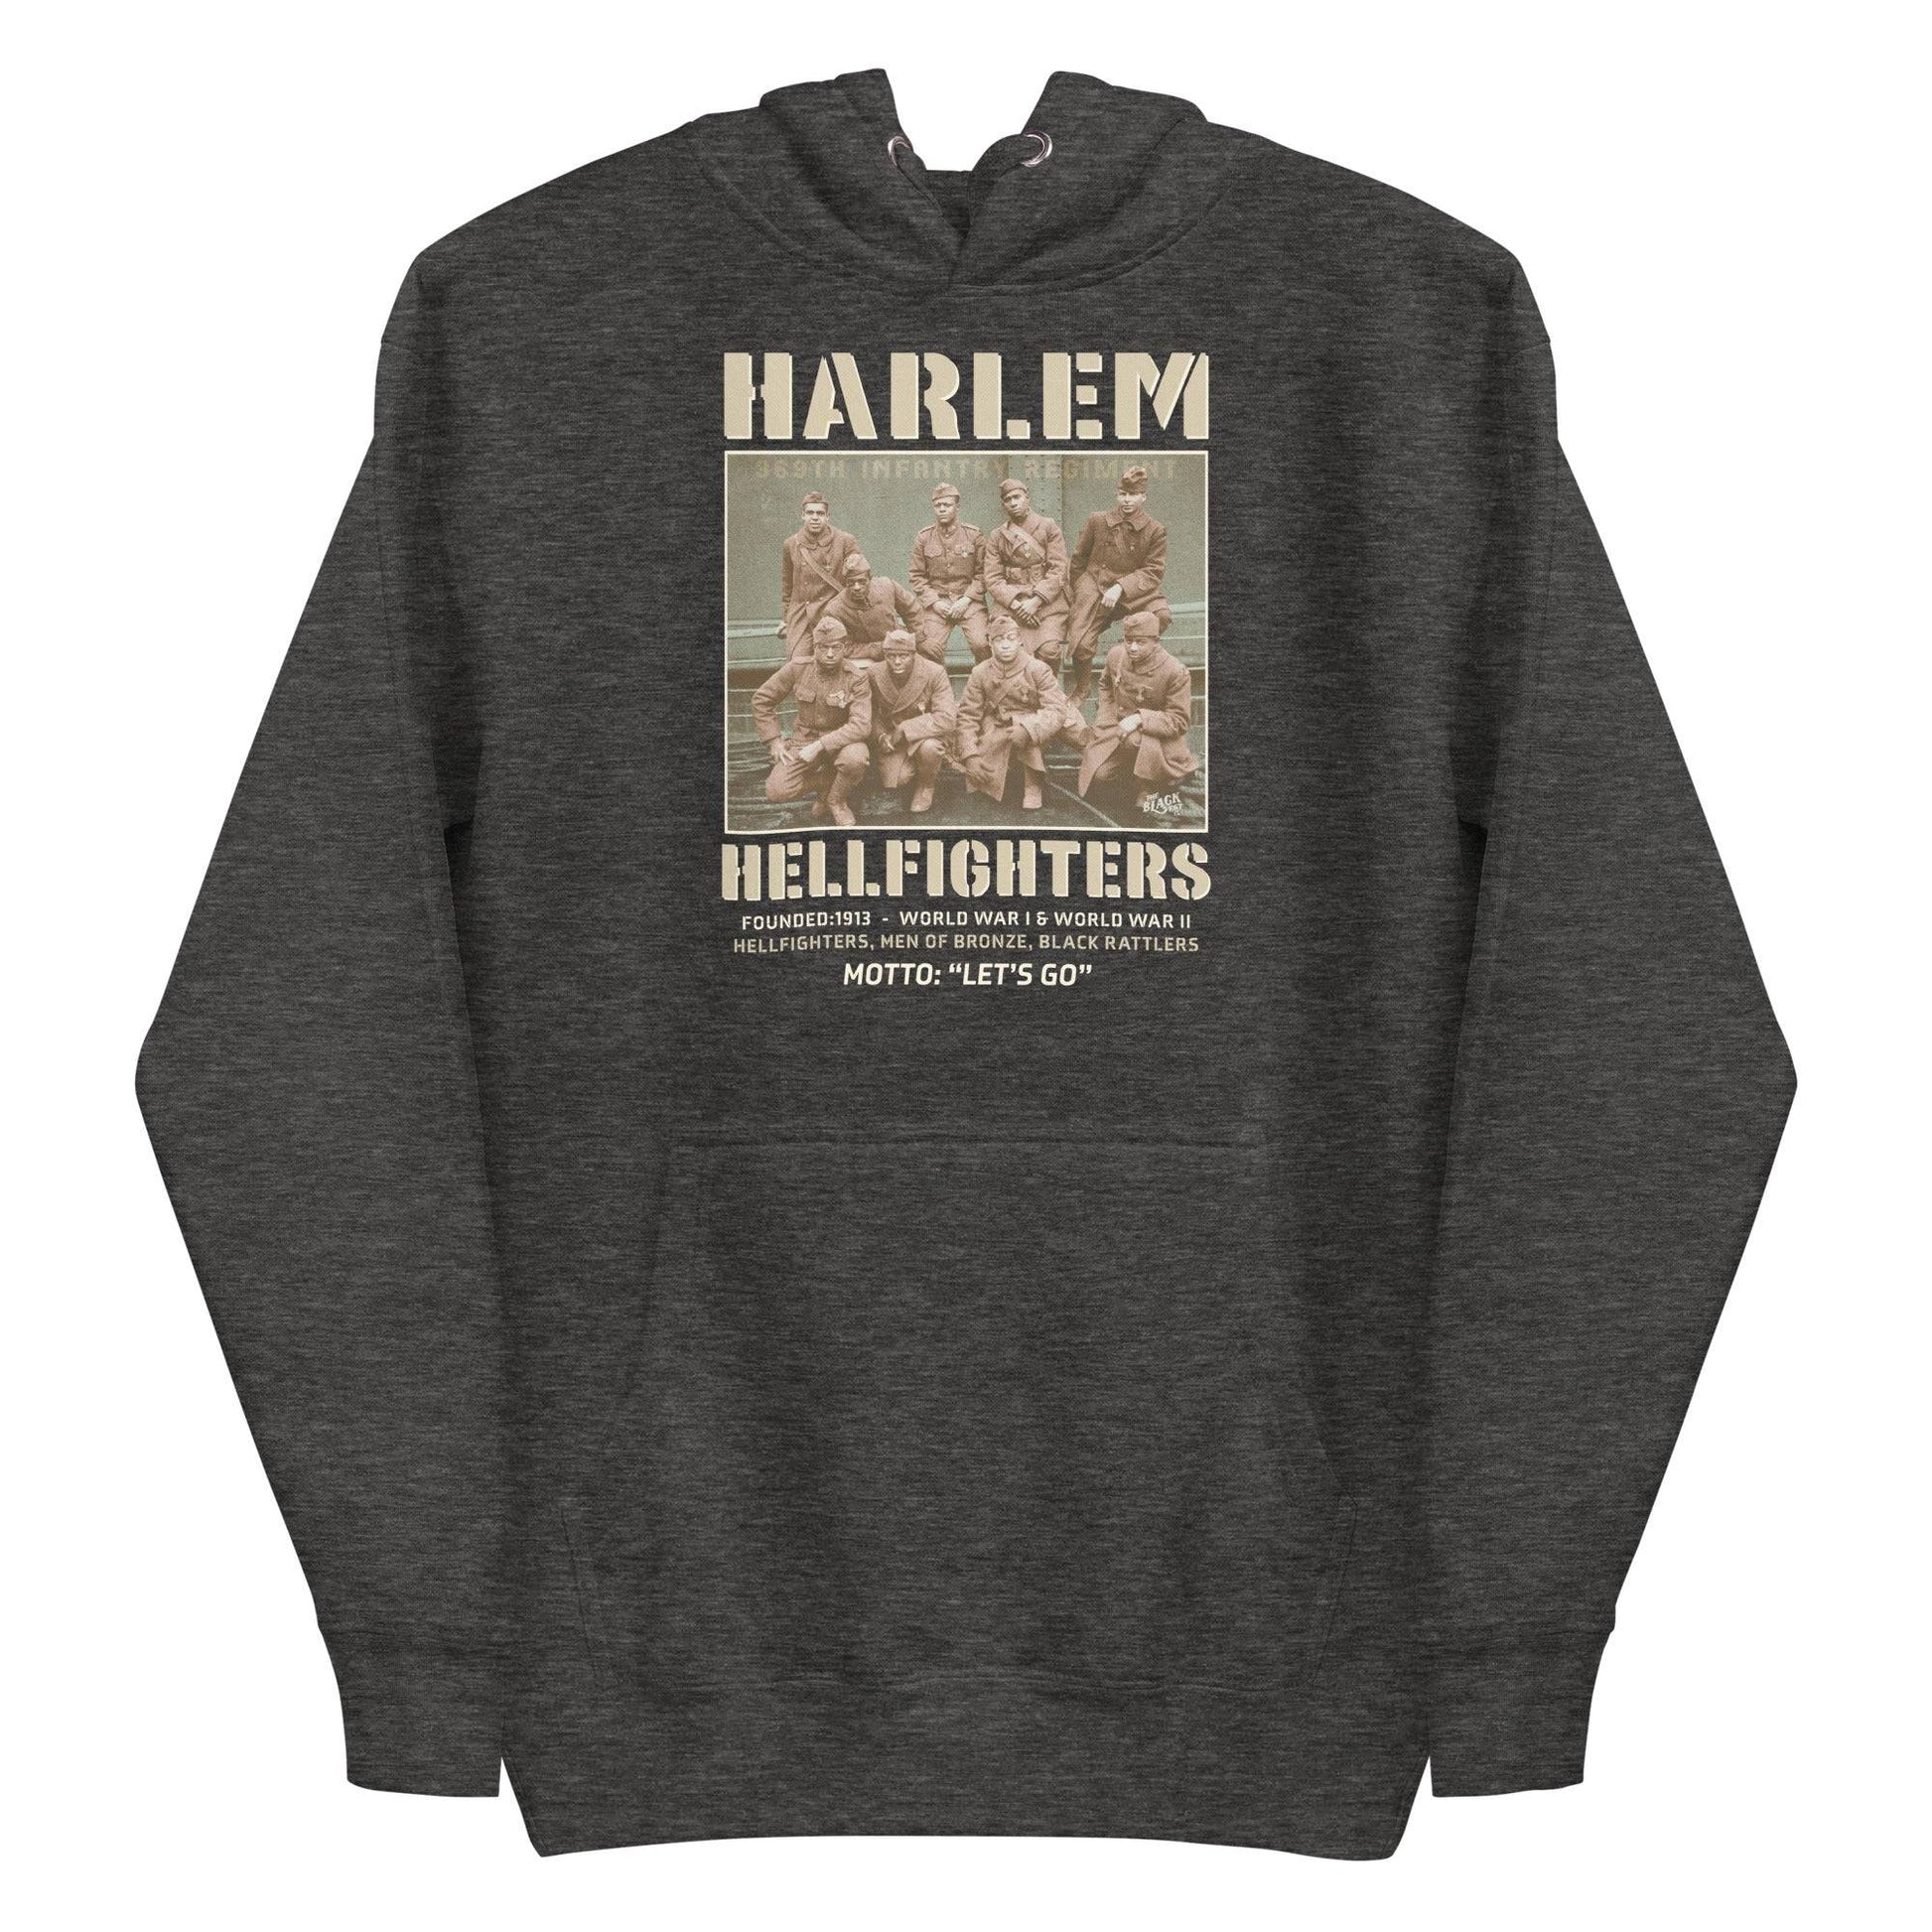 dark grey pullover hoodie with vintage image of the wwi soldiers and text that reads harlem hellfighters